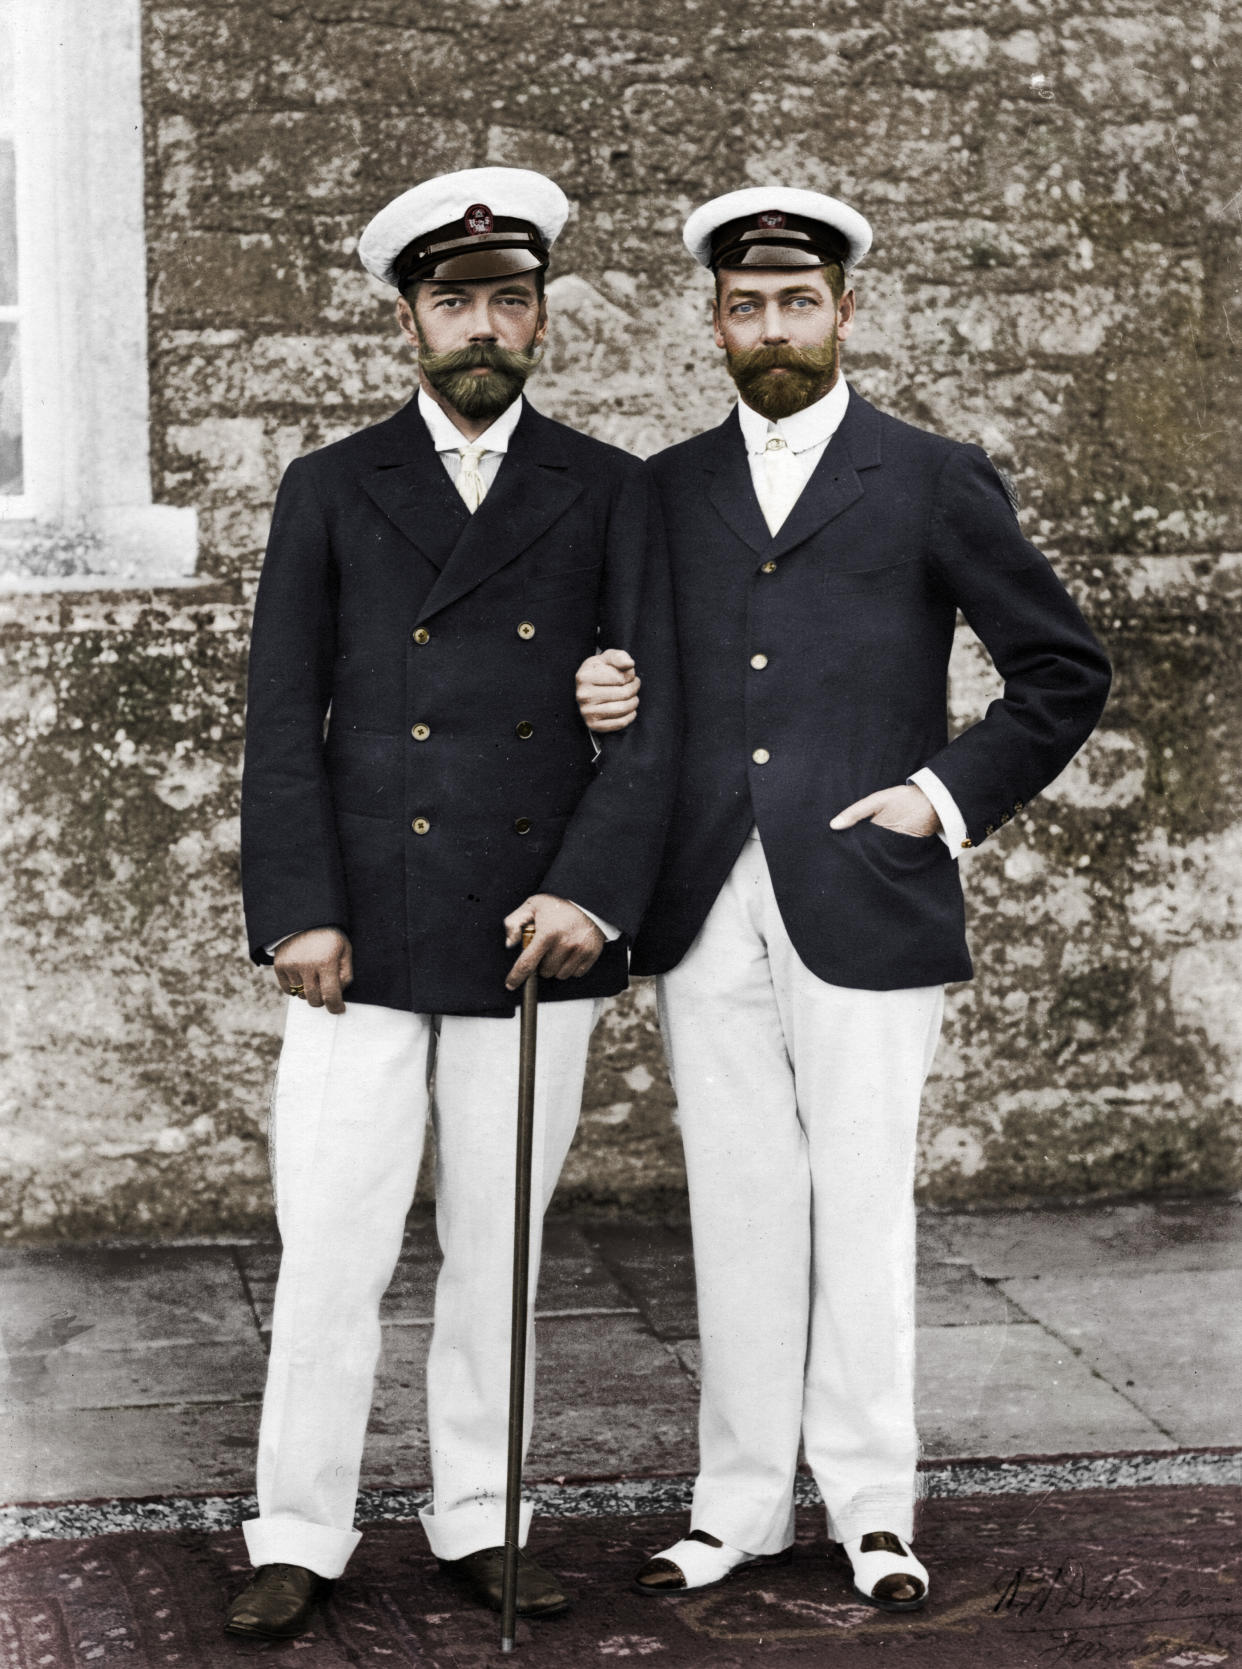 Tsar Nicholas II Of Russia And King George V Of Great Britain (Print Collector / Getty Images)